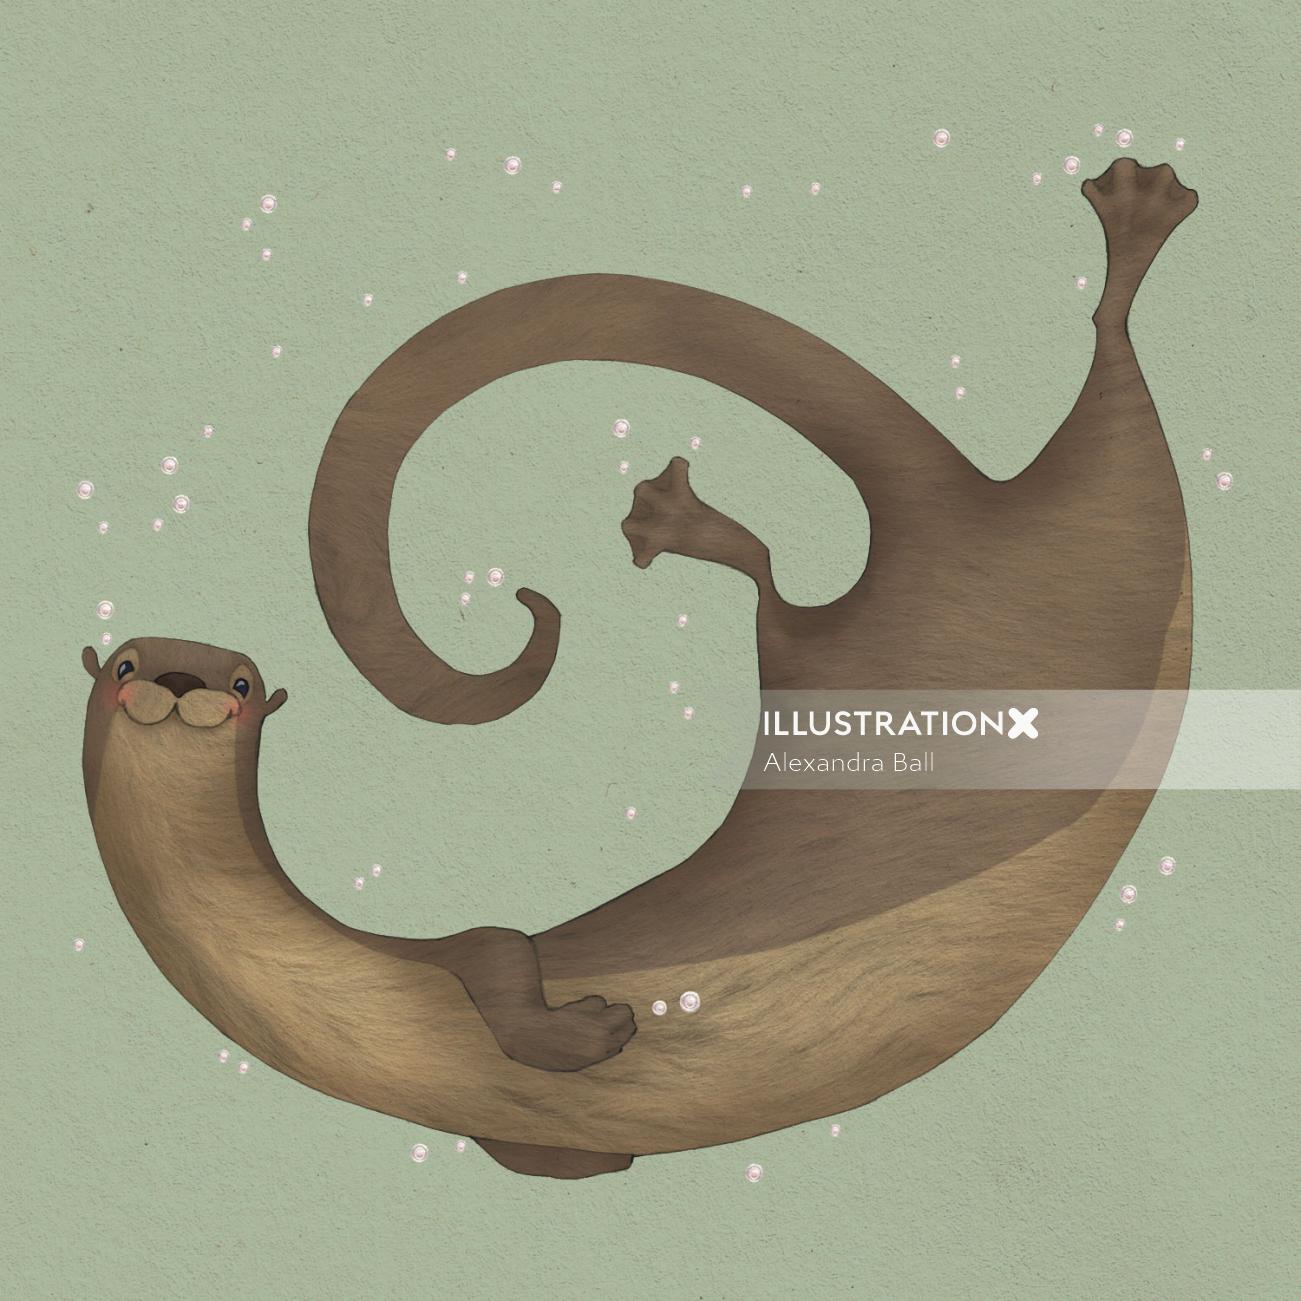 Illustration of happy otter swimming underwater in a friendly and playful way